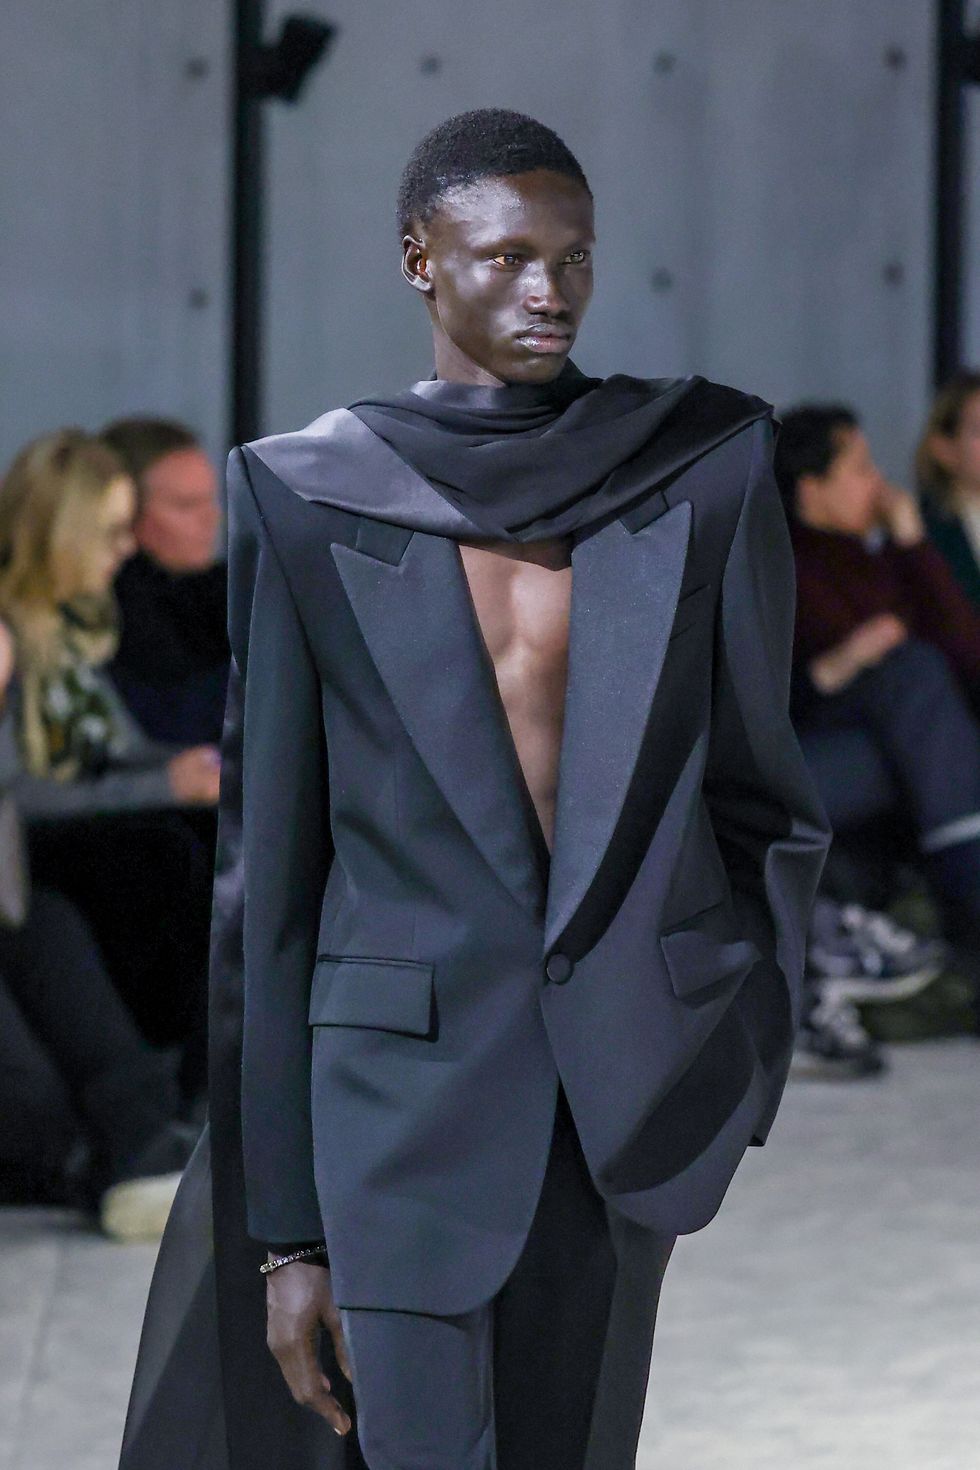 paris, france january 17 editorial use only for non editorial use please seek approval from fashion house a model walks the runway during the saint laurent menswear fall winter 2023 2024 show as part of paris fashion week on january 17, 2023 in paris, france photo by peter whitegetty images